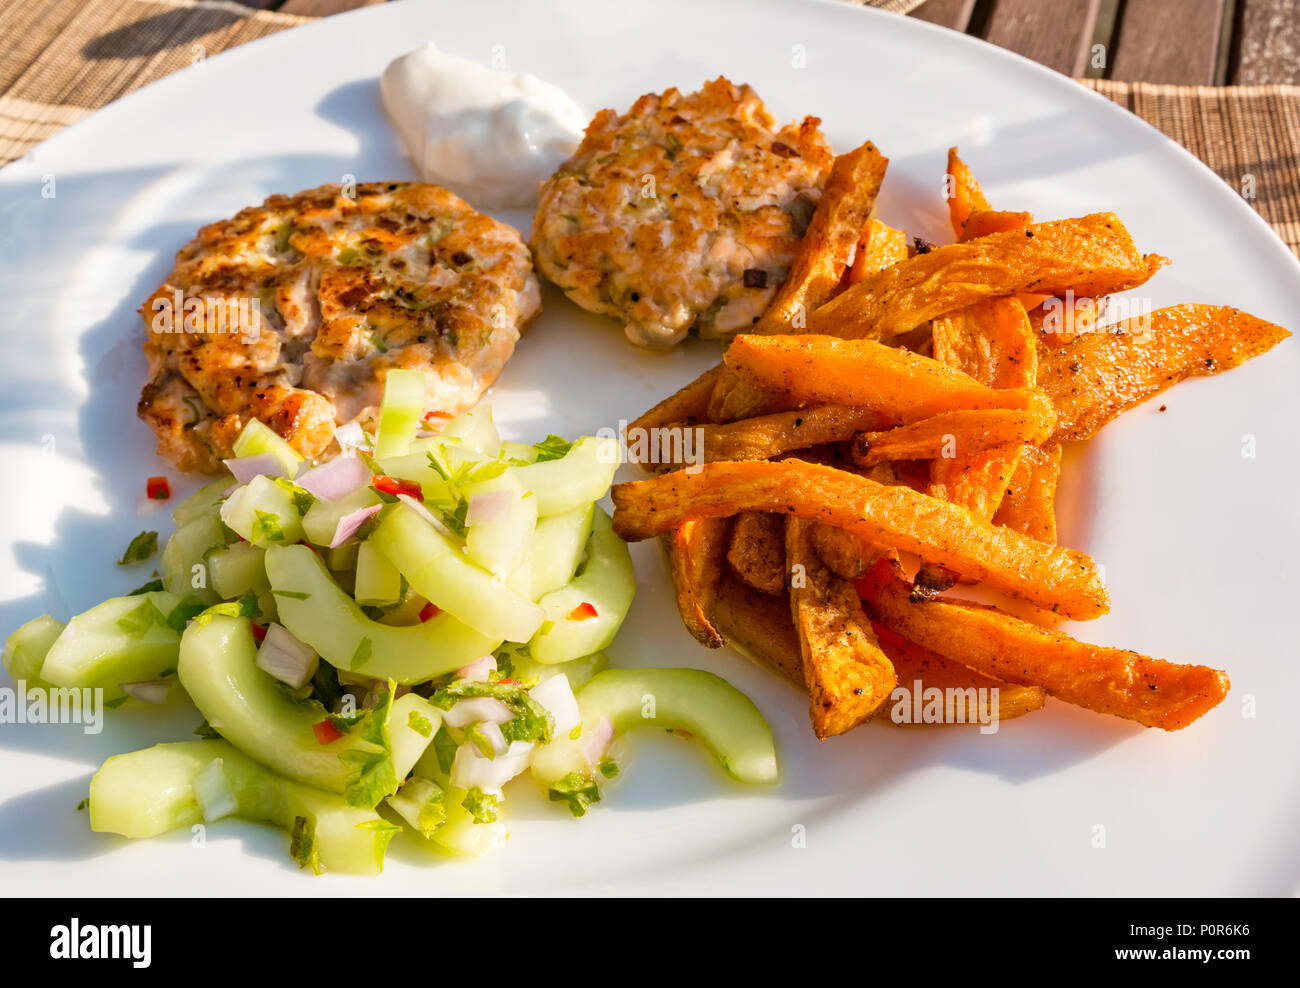 Close up of white dinner plate with Southeast Asian food served in sunshine. Salmon fishcakes, cucumber salad and sweet potato chips Stock Photo